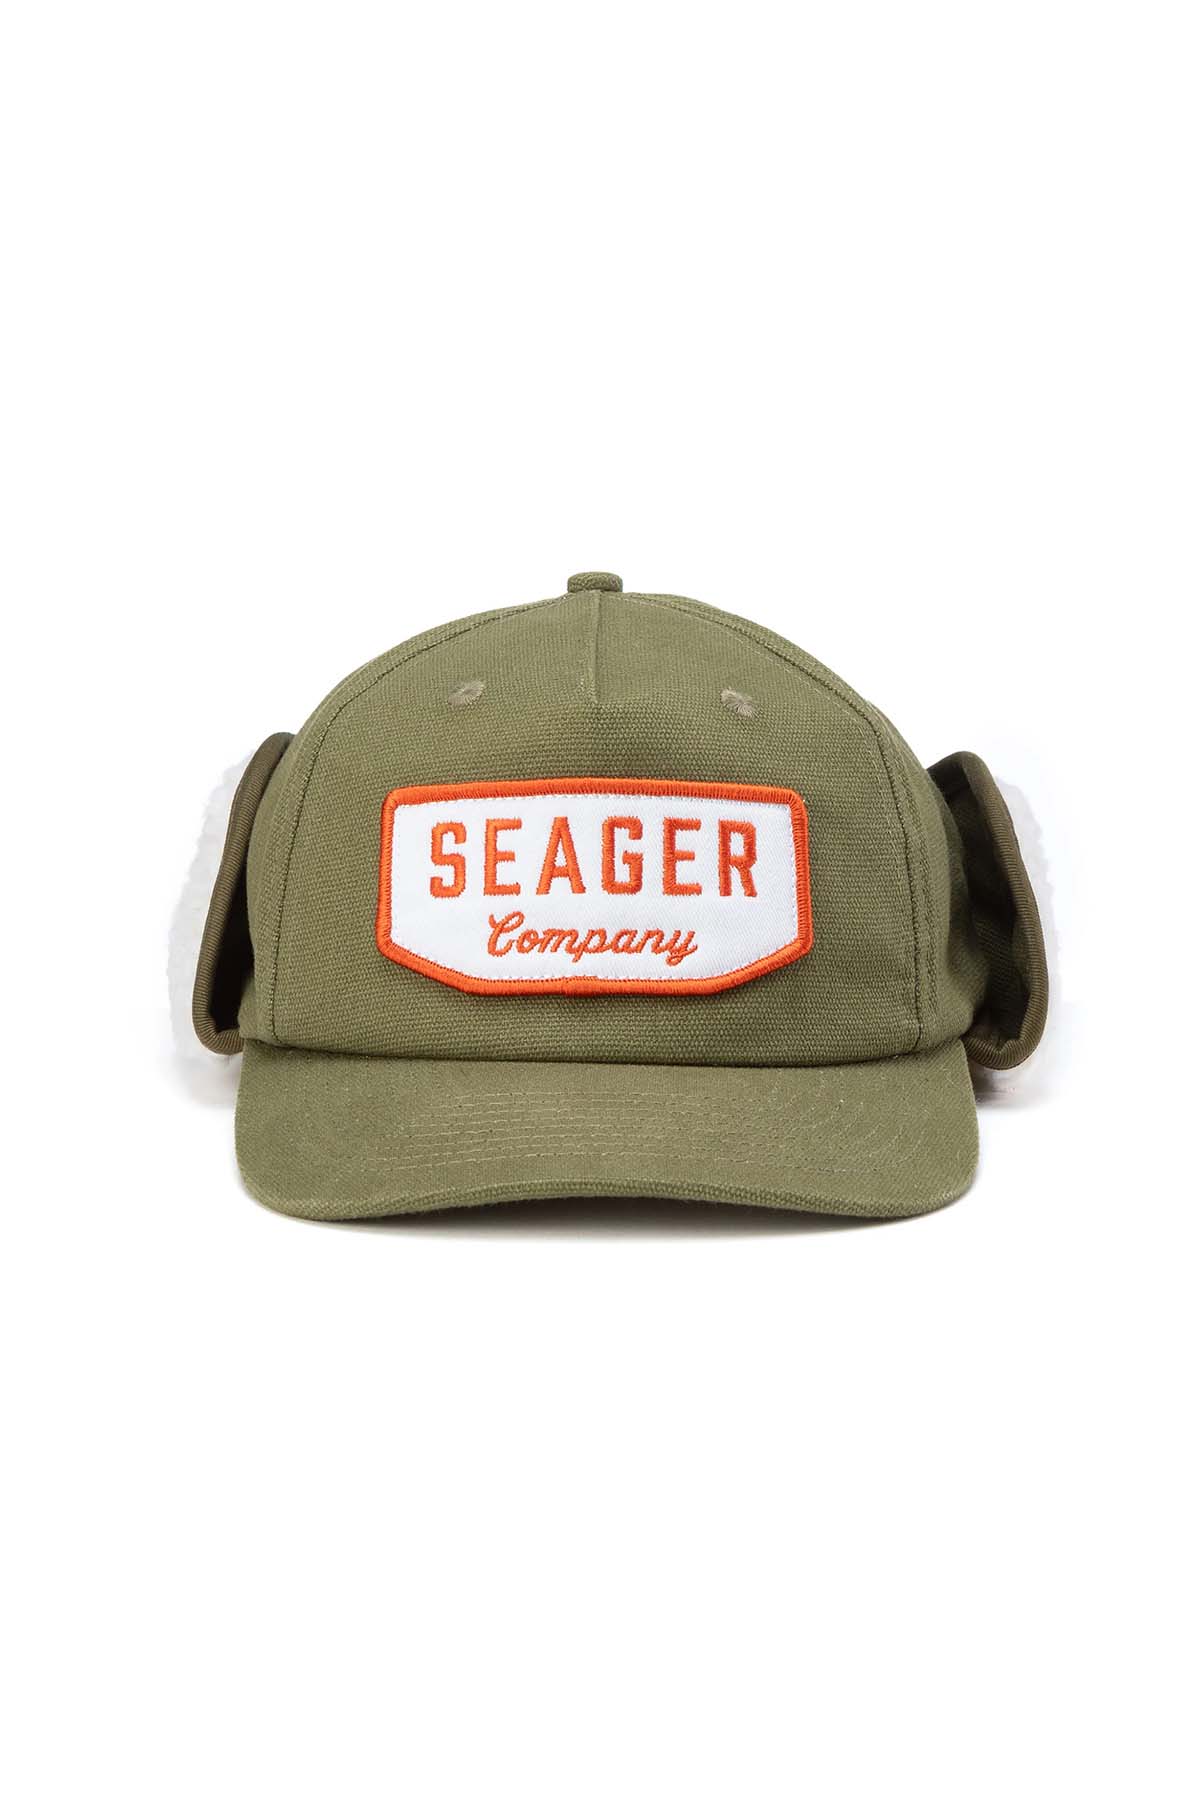 Seager - Wilson Flapjack - Green - Front